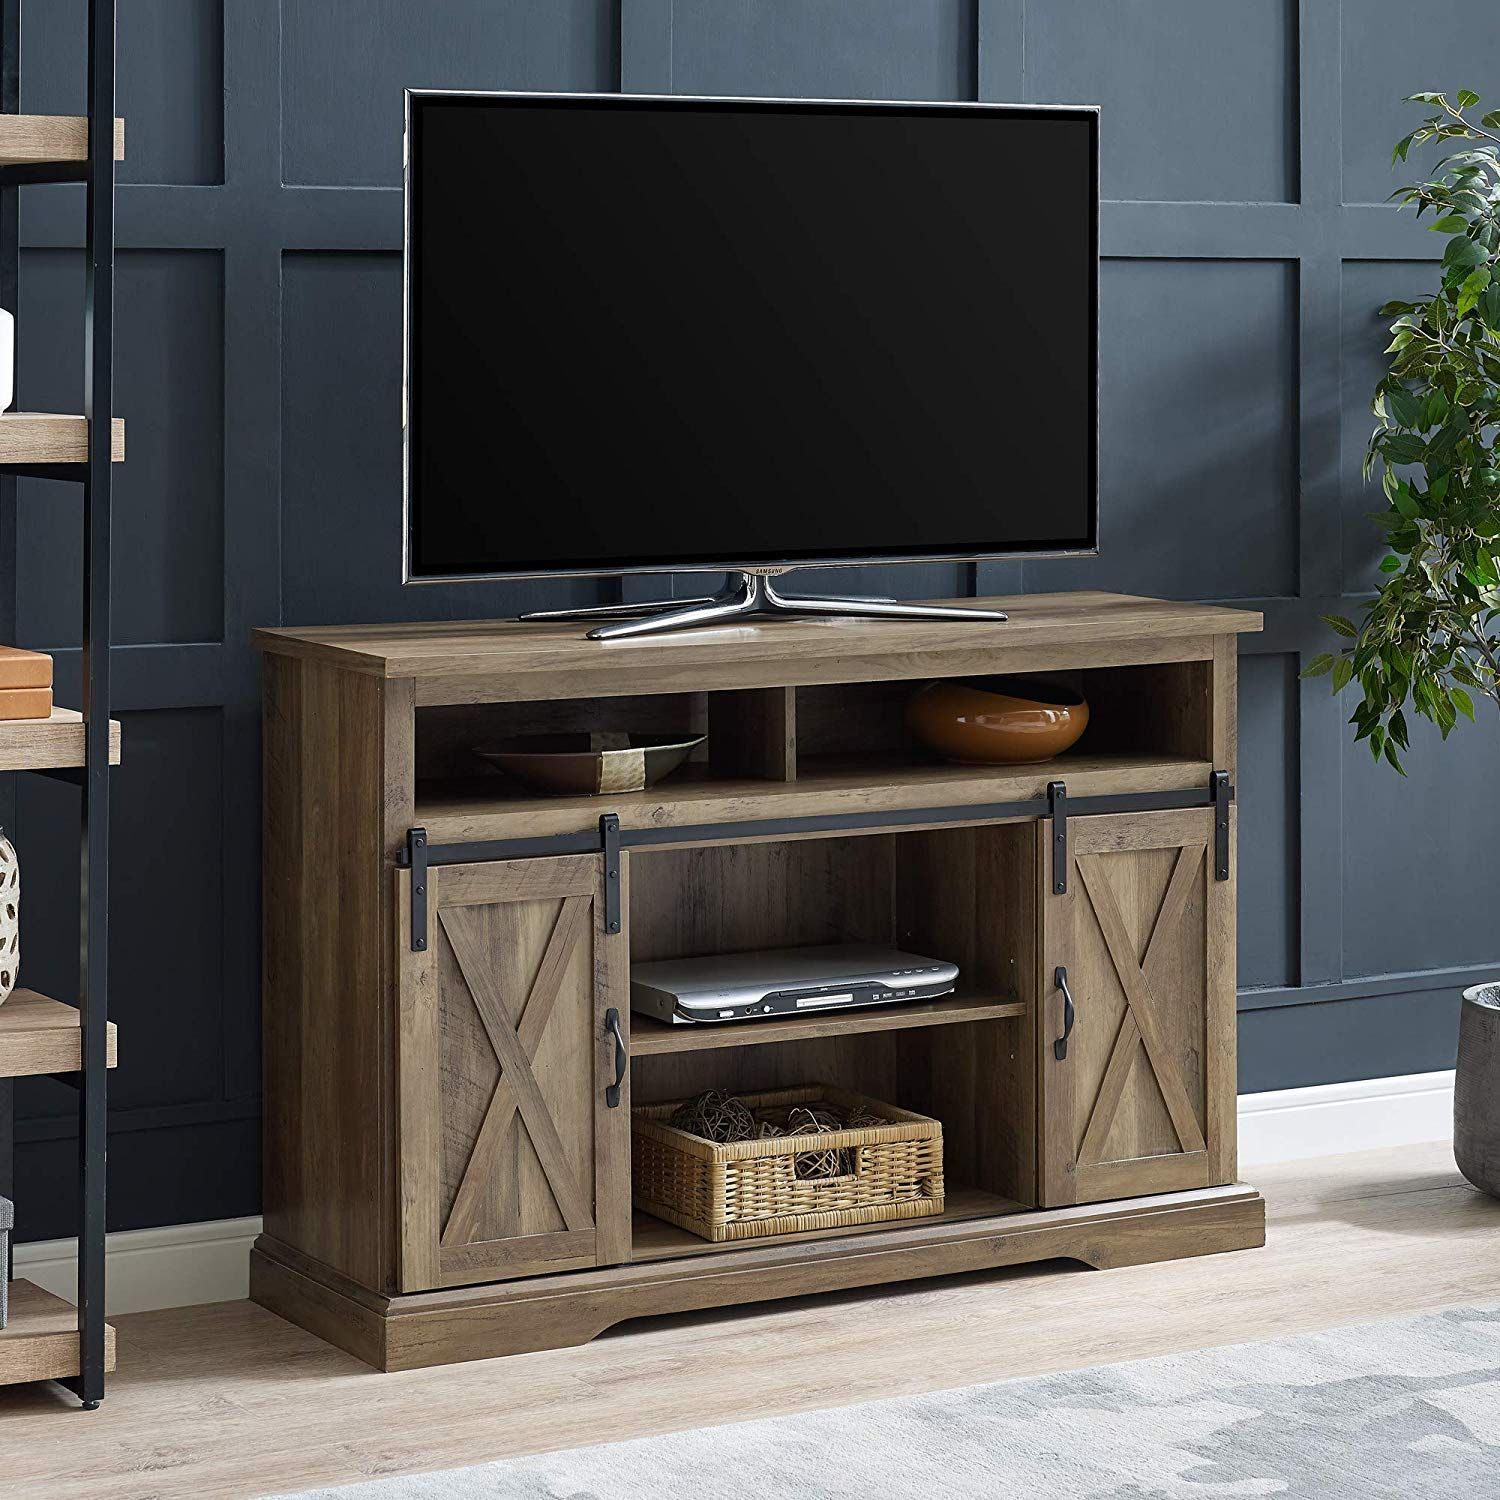 Farmhouse Tv Stands & Rustic Tv Stands – Farmhouse Goals | Farmhouse Tv Regarding Modern Farmhouse Rustic Tv Stands (Gallery 8 of 20)